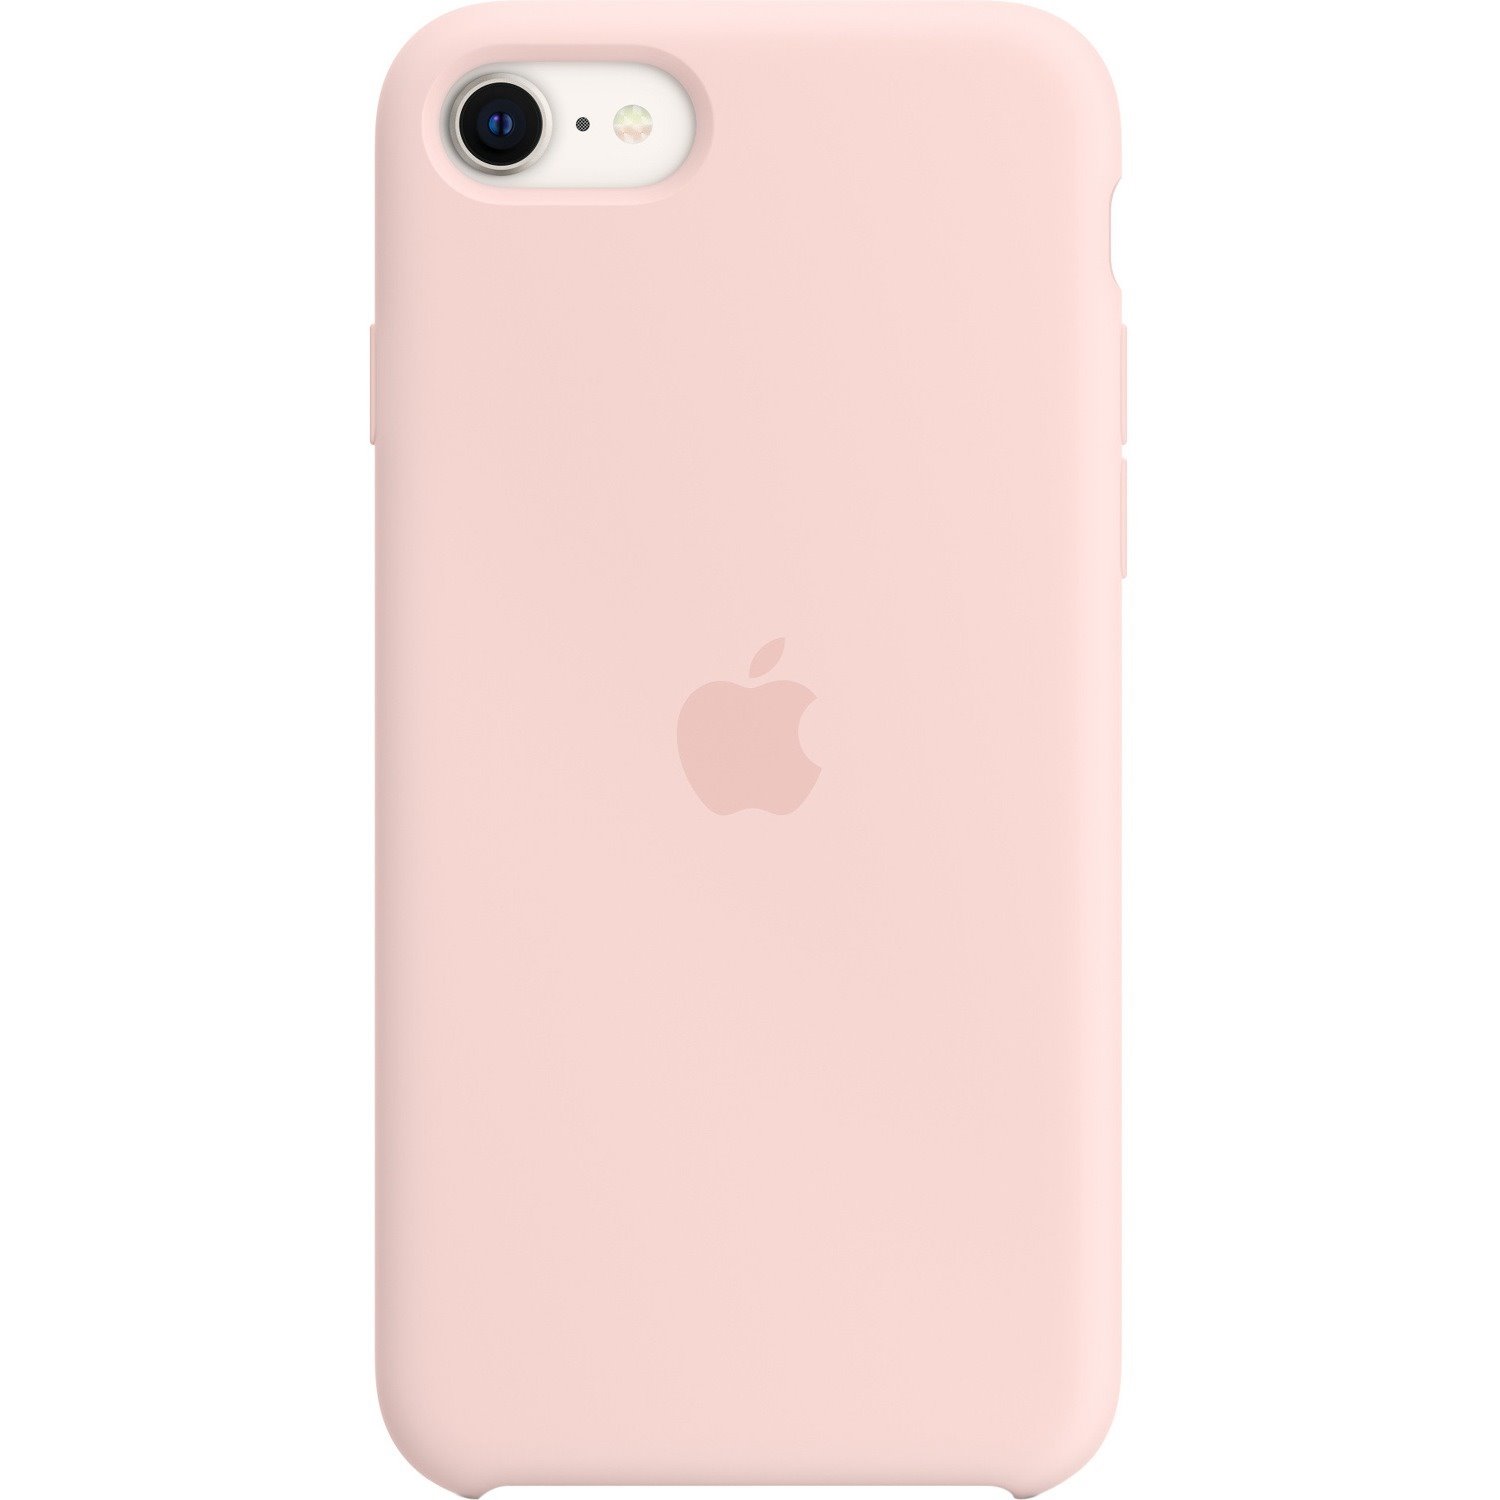 Apple Case for Apple iPhone 7, iPhone 8, iPhone SE 2, iPhone SE 3 Smartphone - Chalk Pink